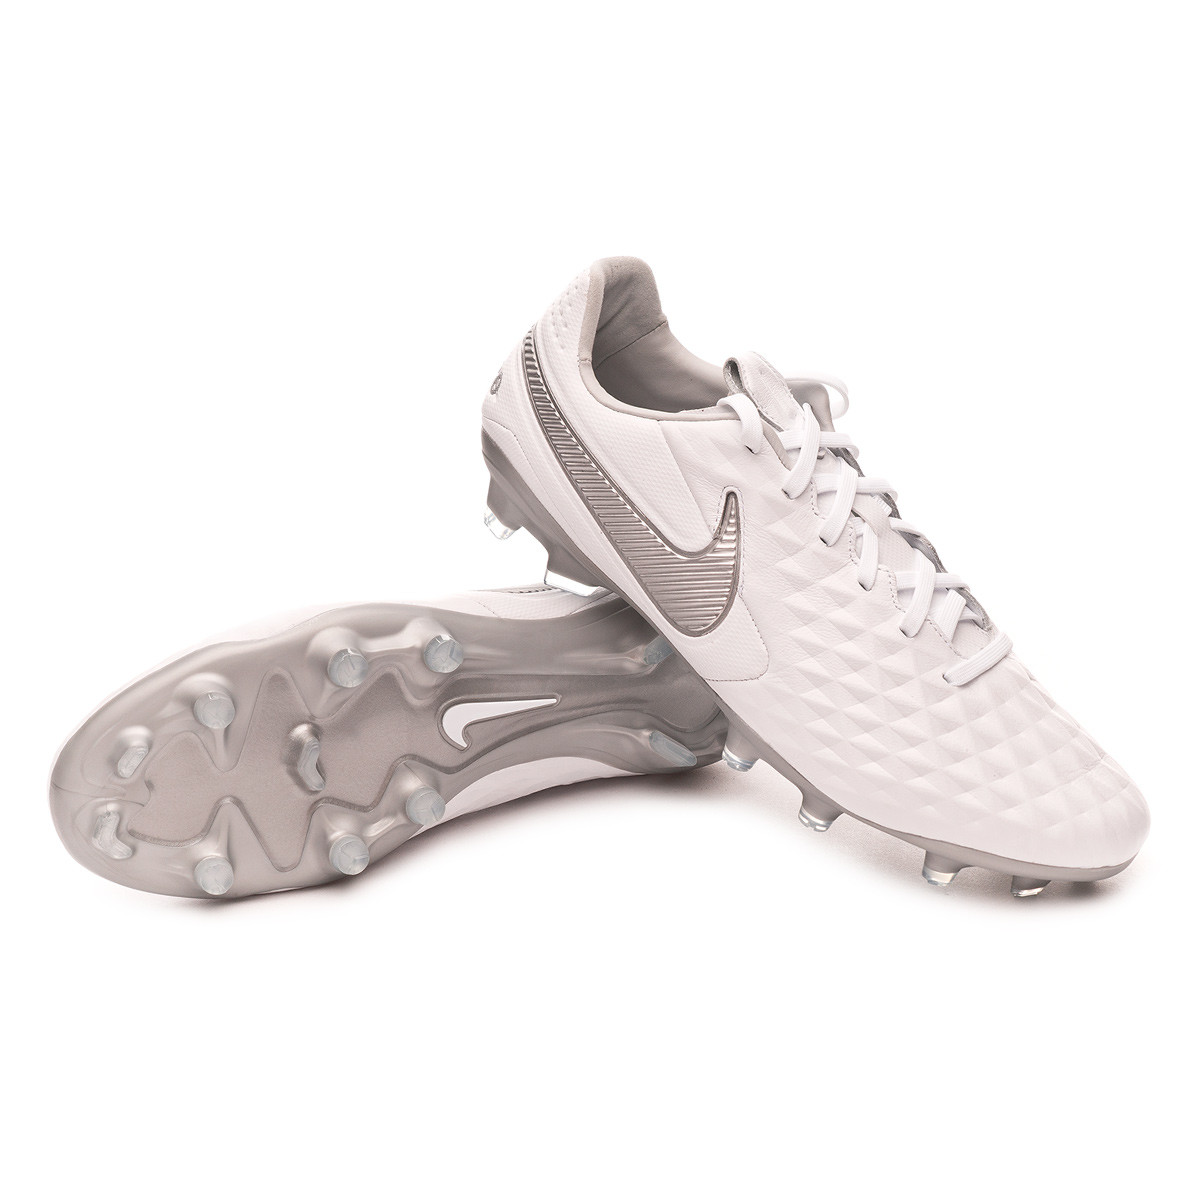 nike silver football boots